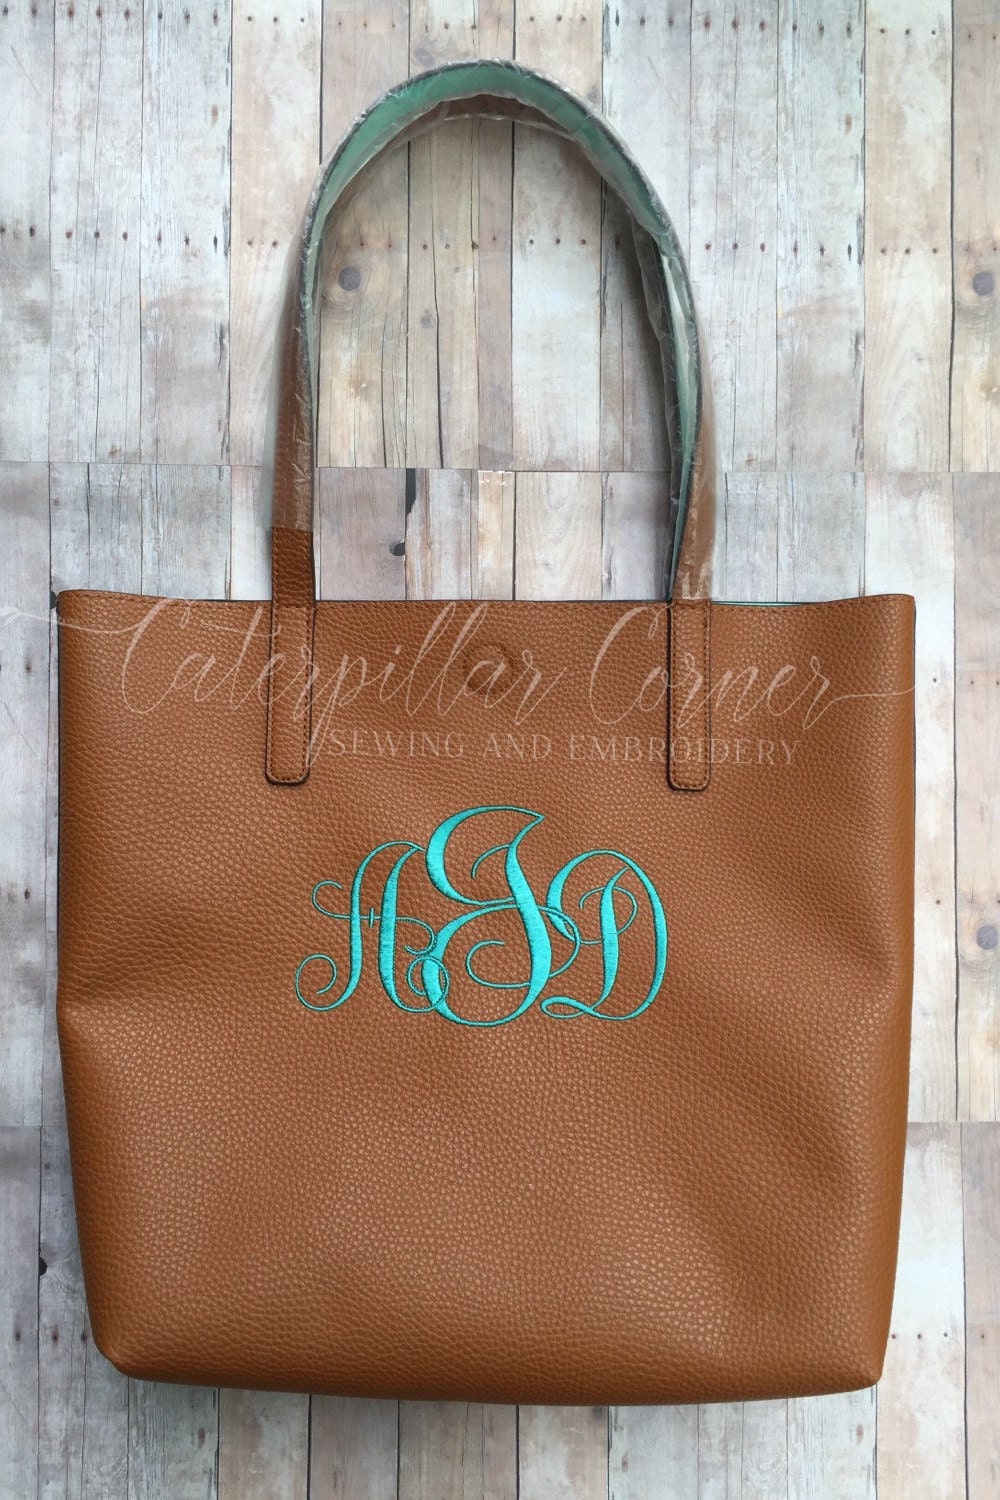 Monogrammed purse Monogrammed Tote Monogrammed Faux Leather